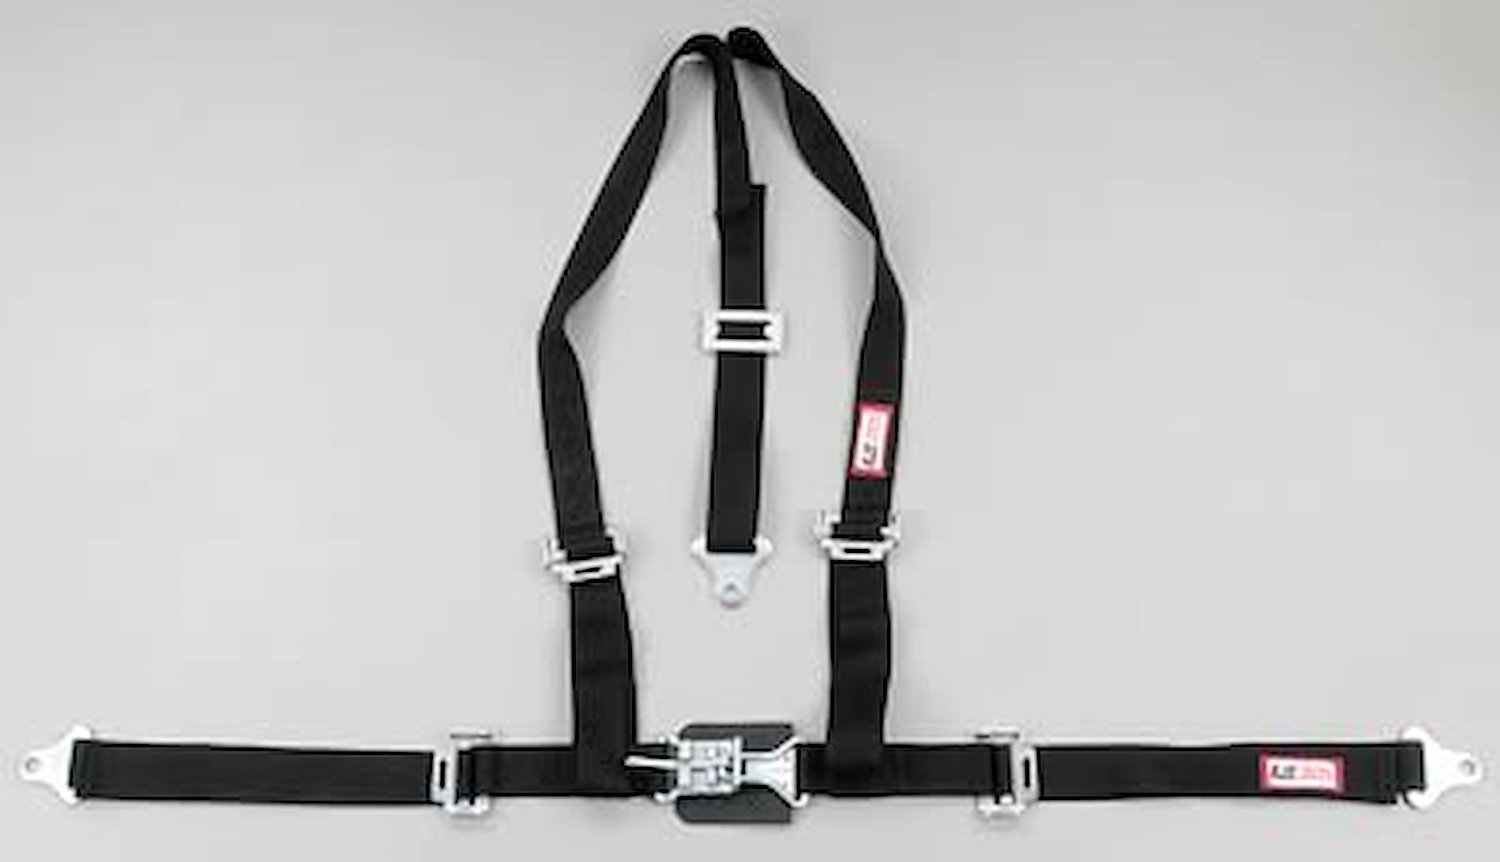 NON-SFI L&L HARNESS 2 PULL UP Lap Belt SNAP SEWN IN 2 S.H. INDIVIDUAL FLOOR Mount w/STERNUM STRAP WRAP/SNAP HOT PINK